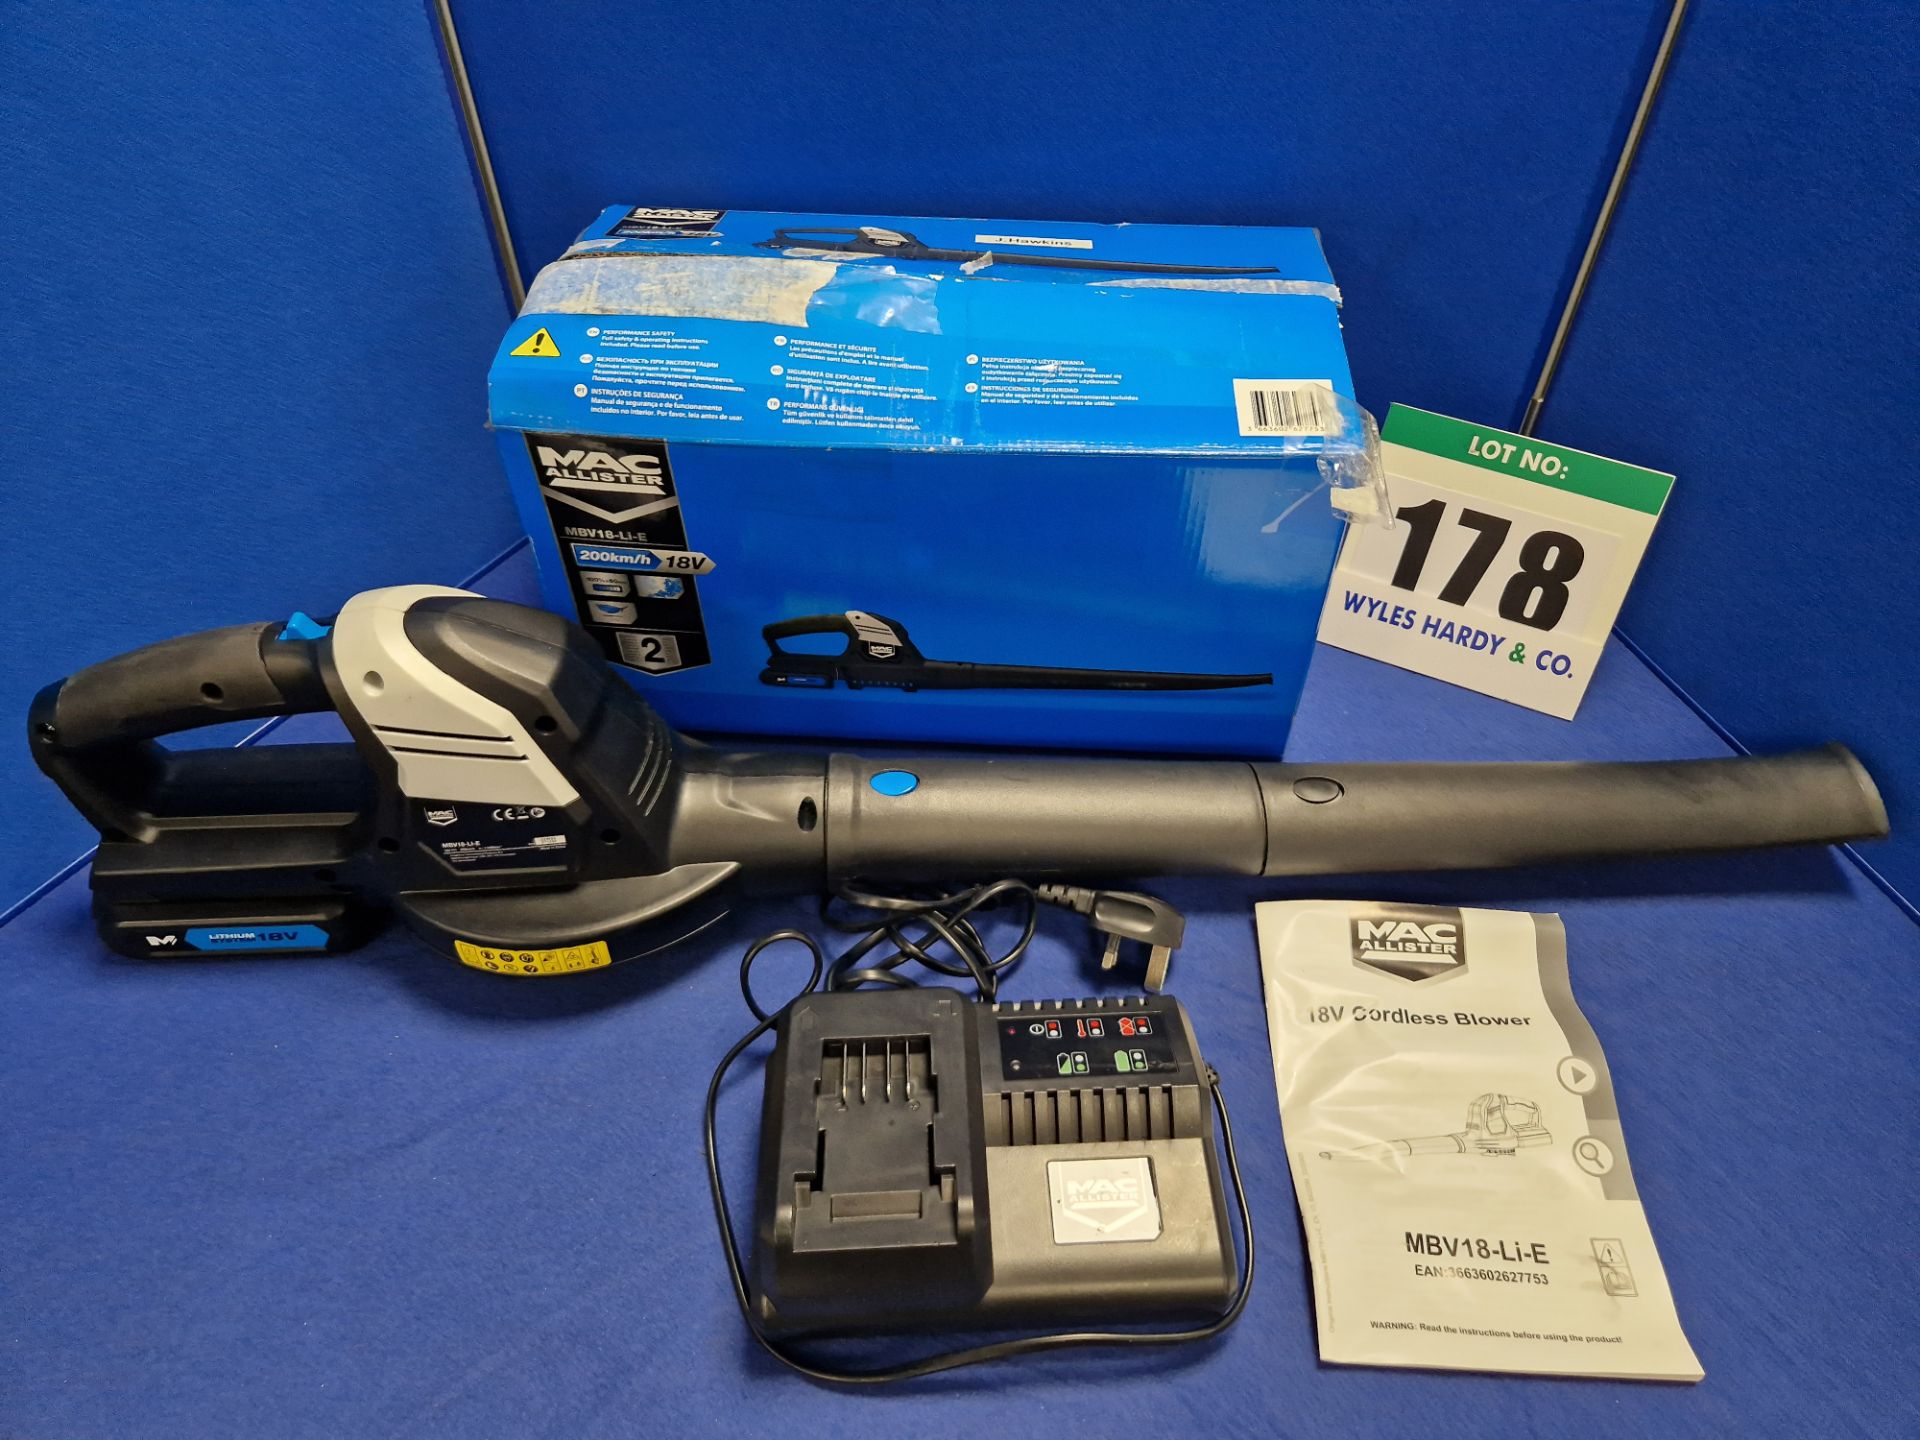 One MACALLISTER Battery Electric Leaf Blower with Battery Charger (Boxed and appears Unused)